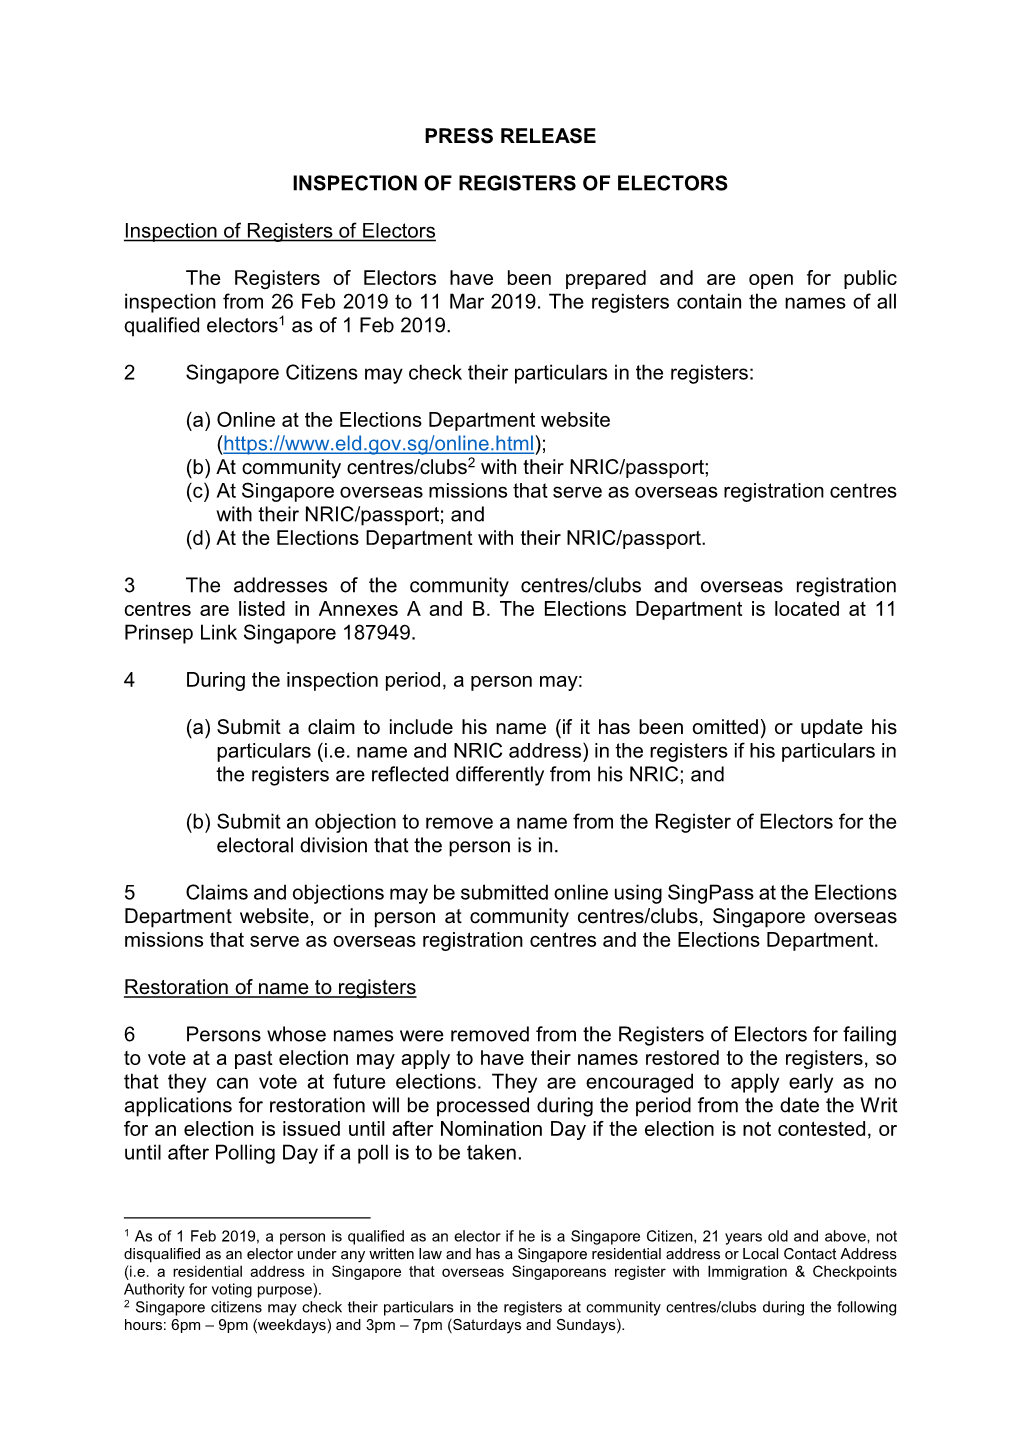 PRESS RELEASE Press Release on Inspection of Registers of Electors